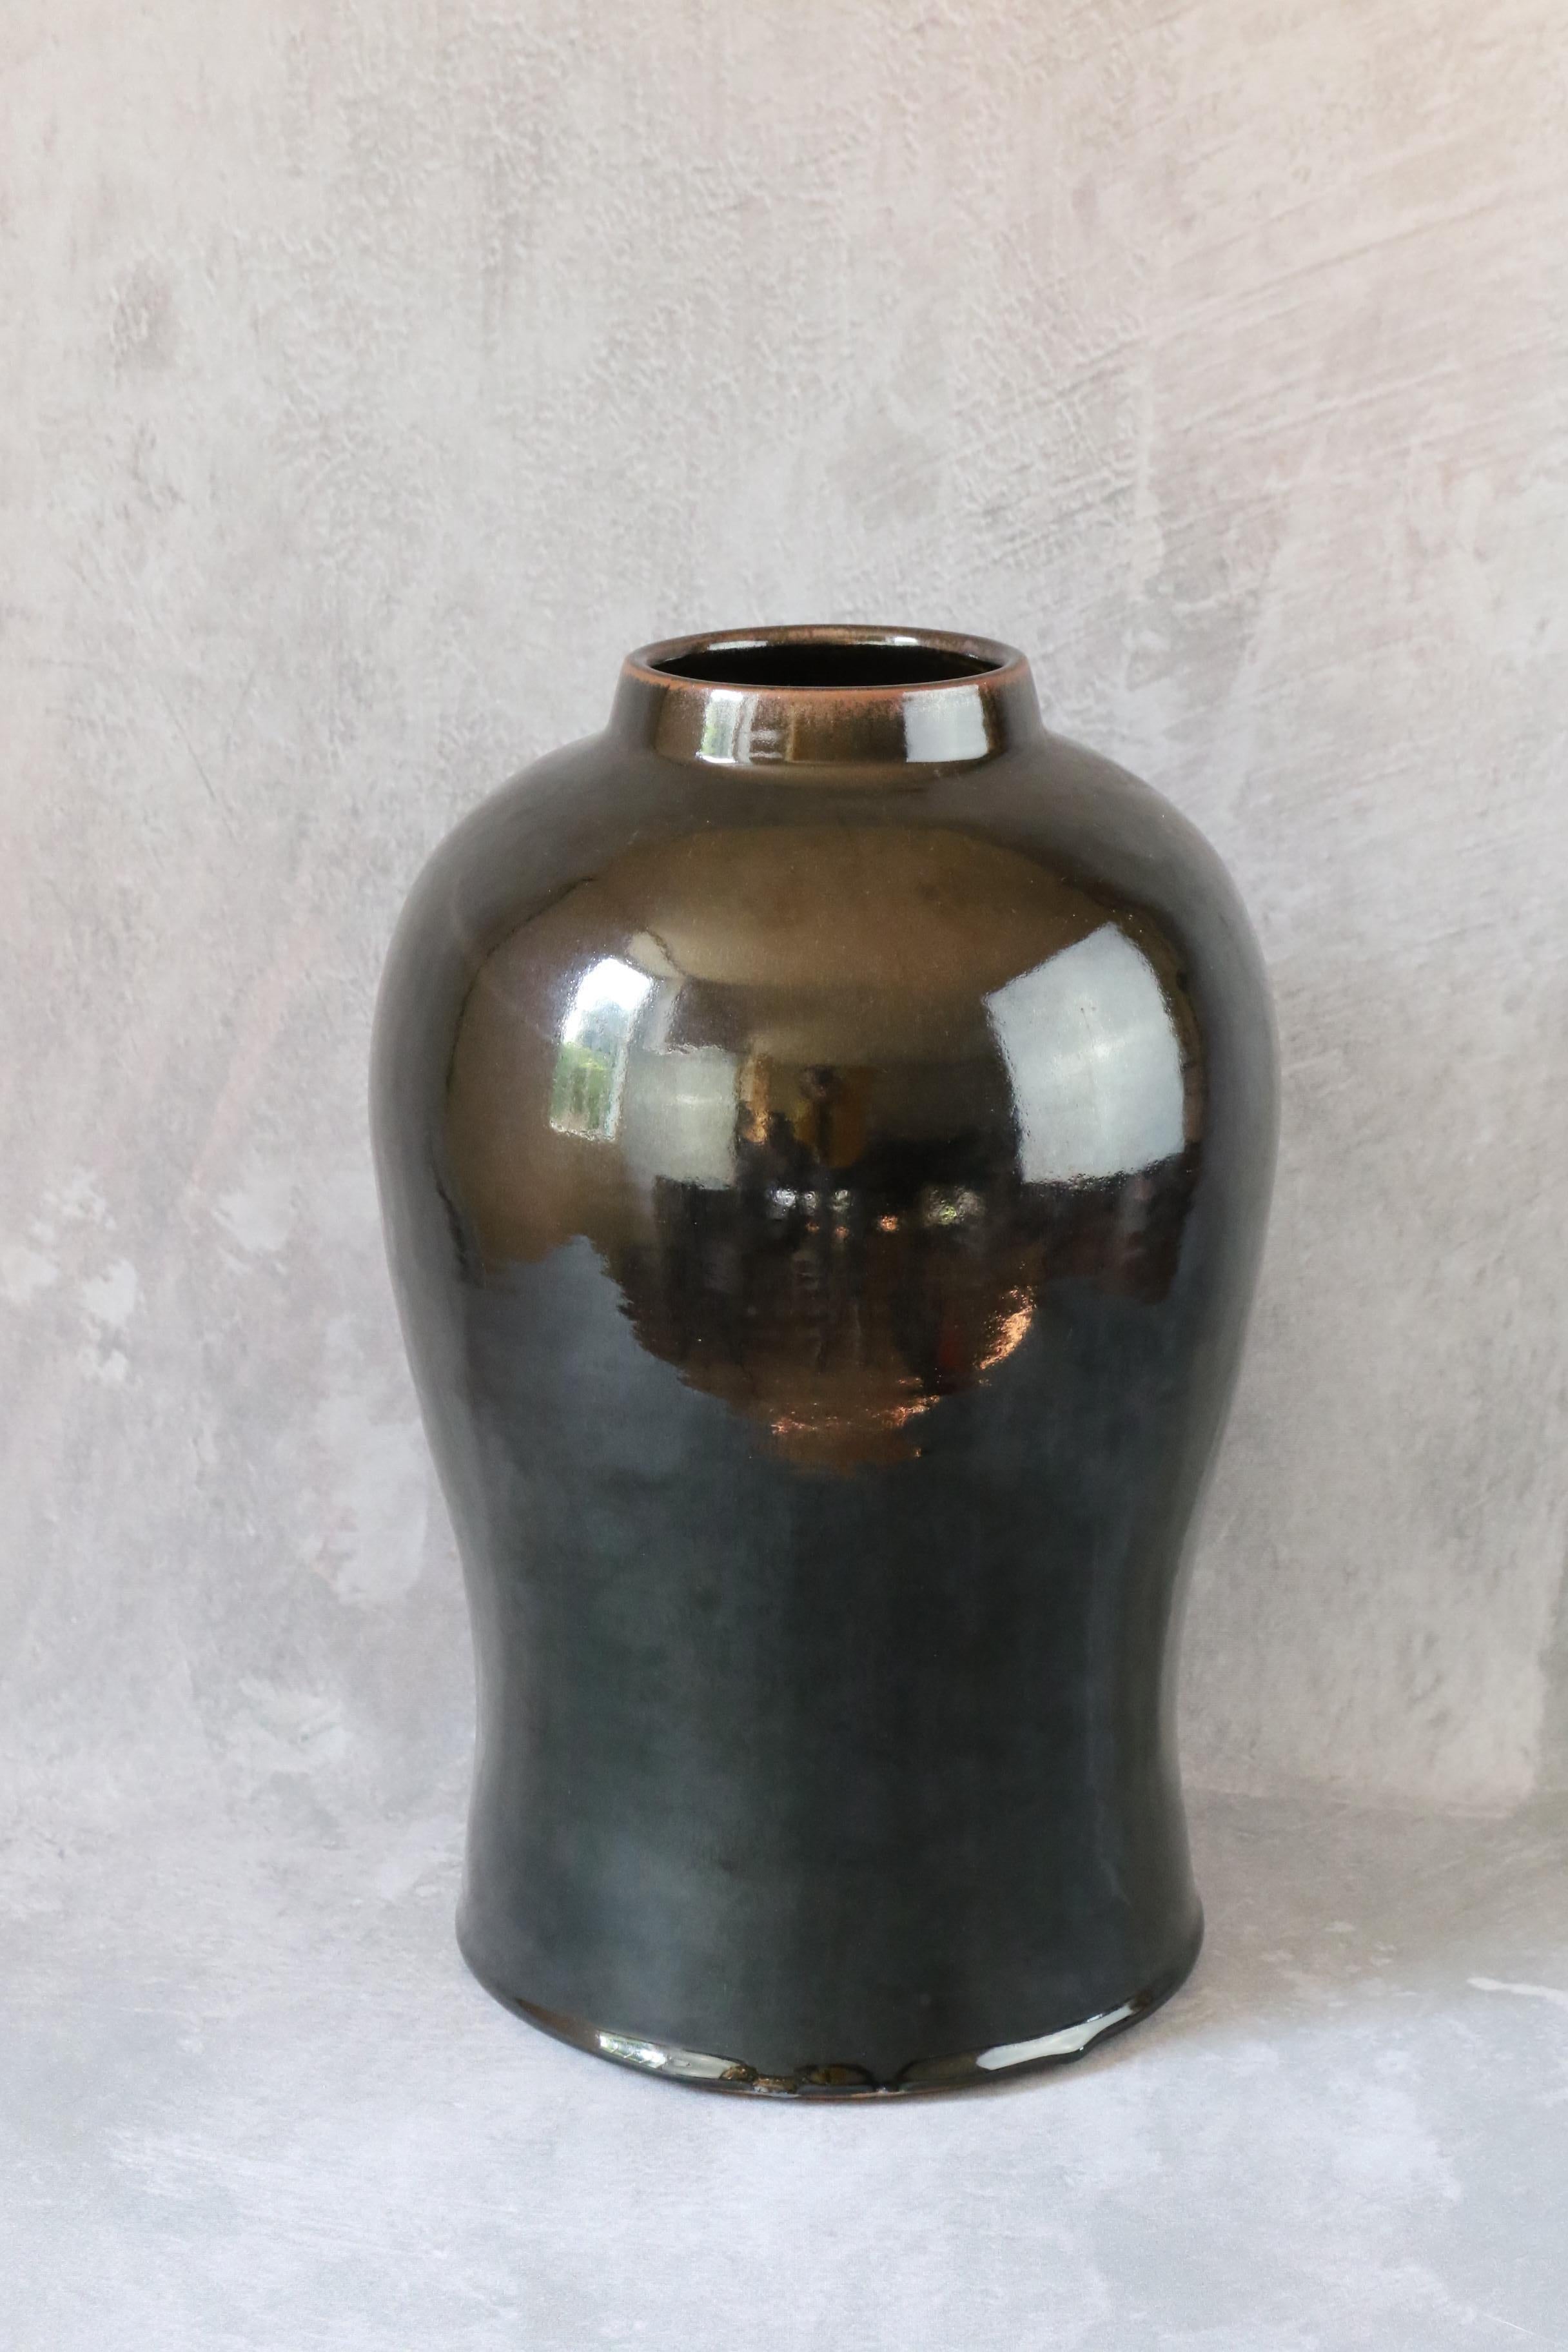 Massive black ceramic vase by the french ceramist Marc Uzan, Midcentury Modern

Stunning by is size, this is a beatiful and massive deep black vase.

Born in Sousse, Tunisia in 1955, Marc Uzan discovered modelling at the age of 18.
In the 1970s, he